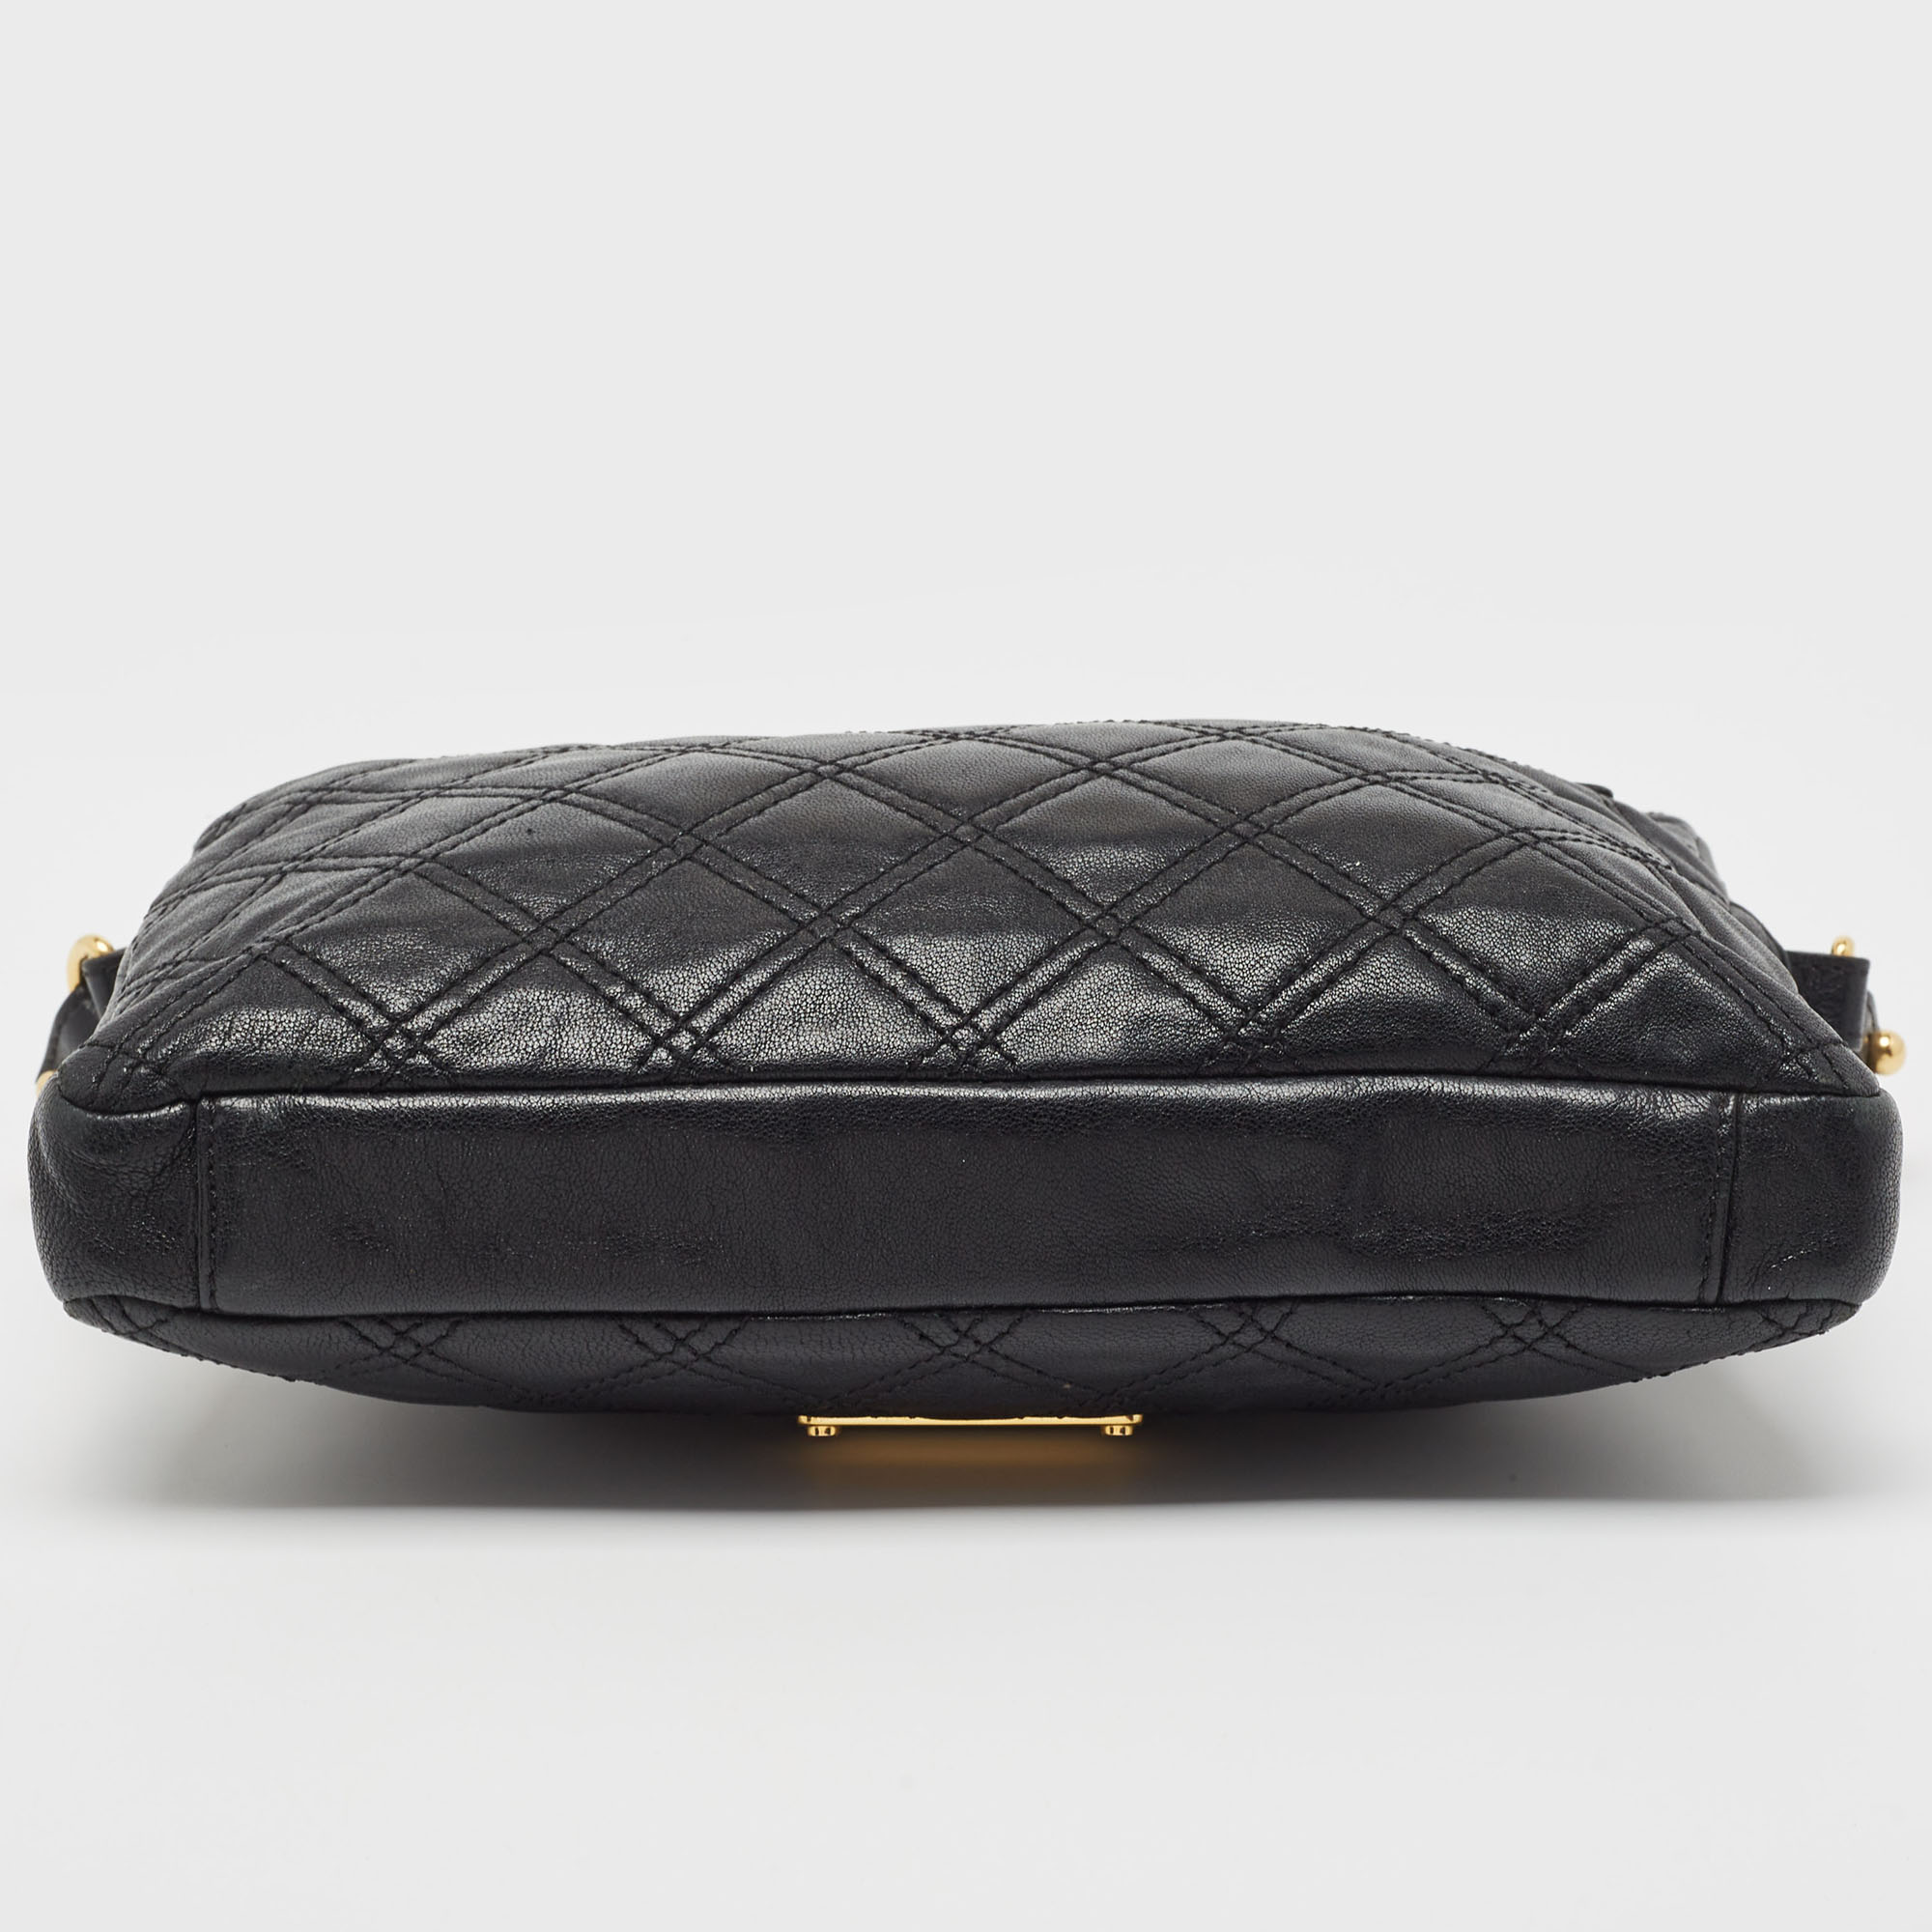 Marc Jacobs Black Quilted Leather Chain Crossbody Bag